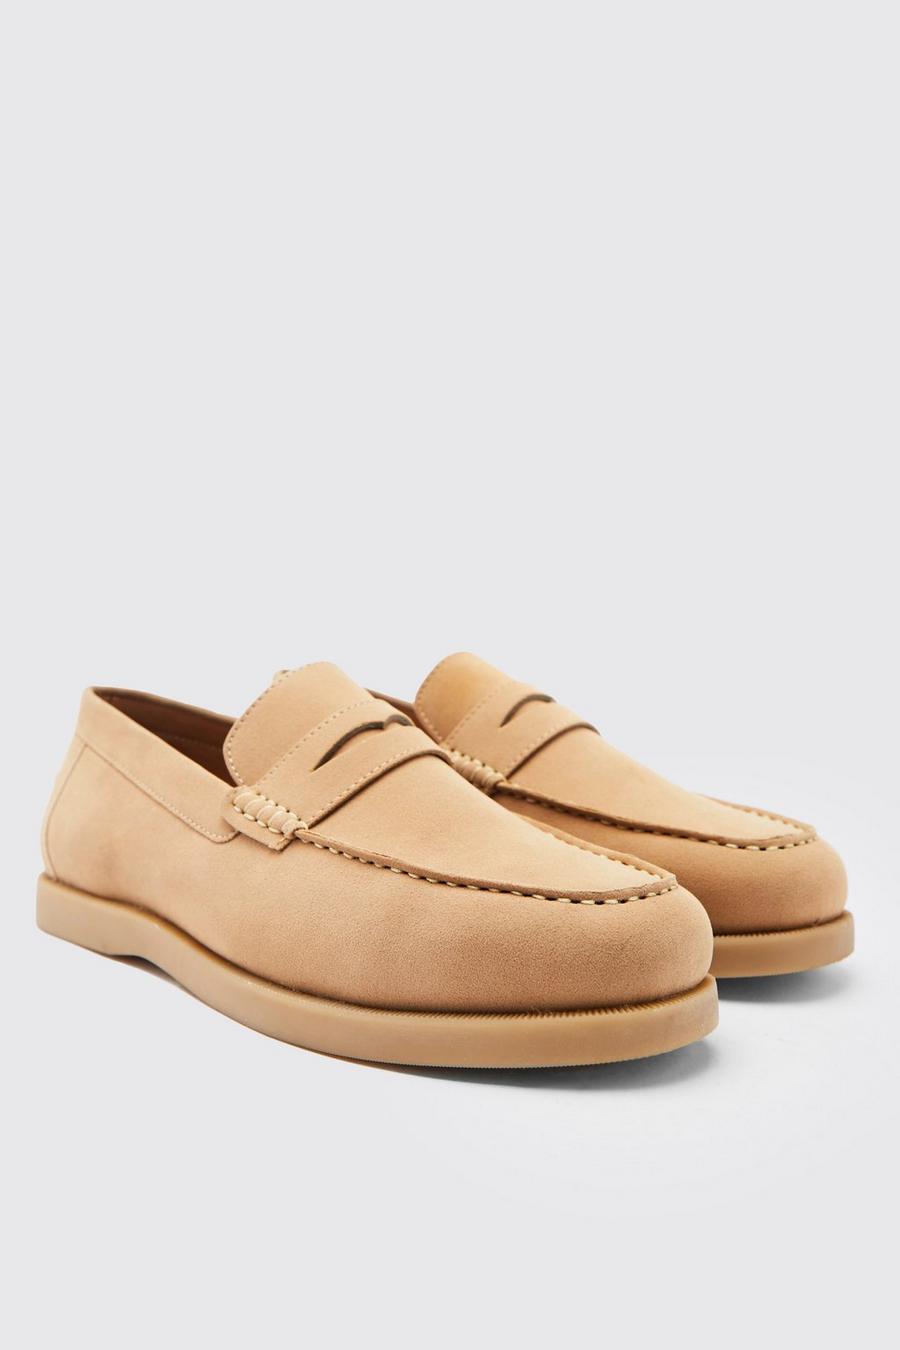 Stone beis Gum Faux Suede Penny Loafer